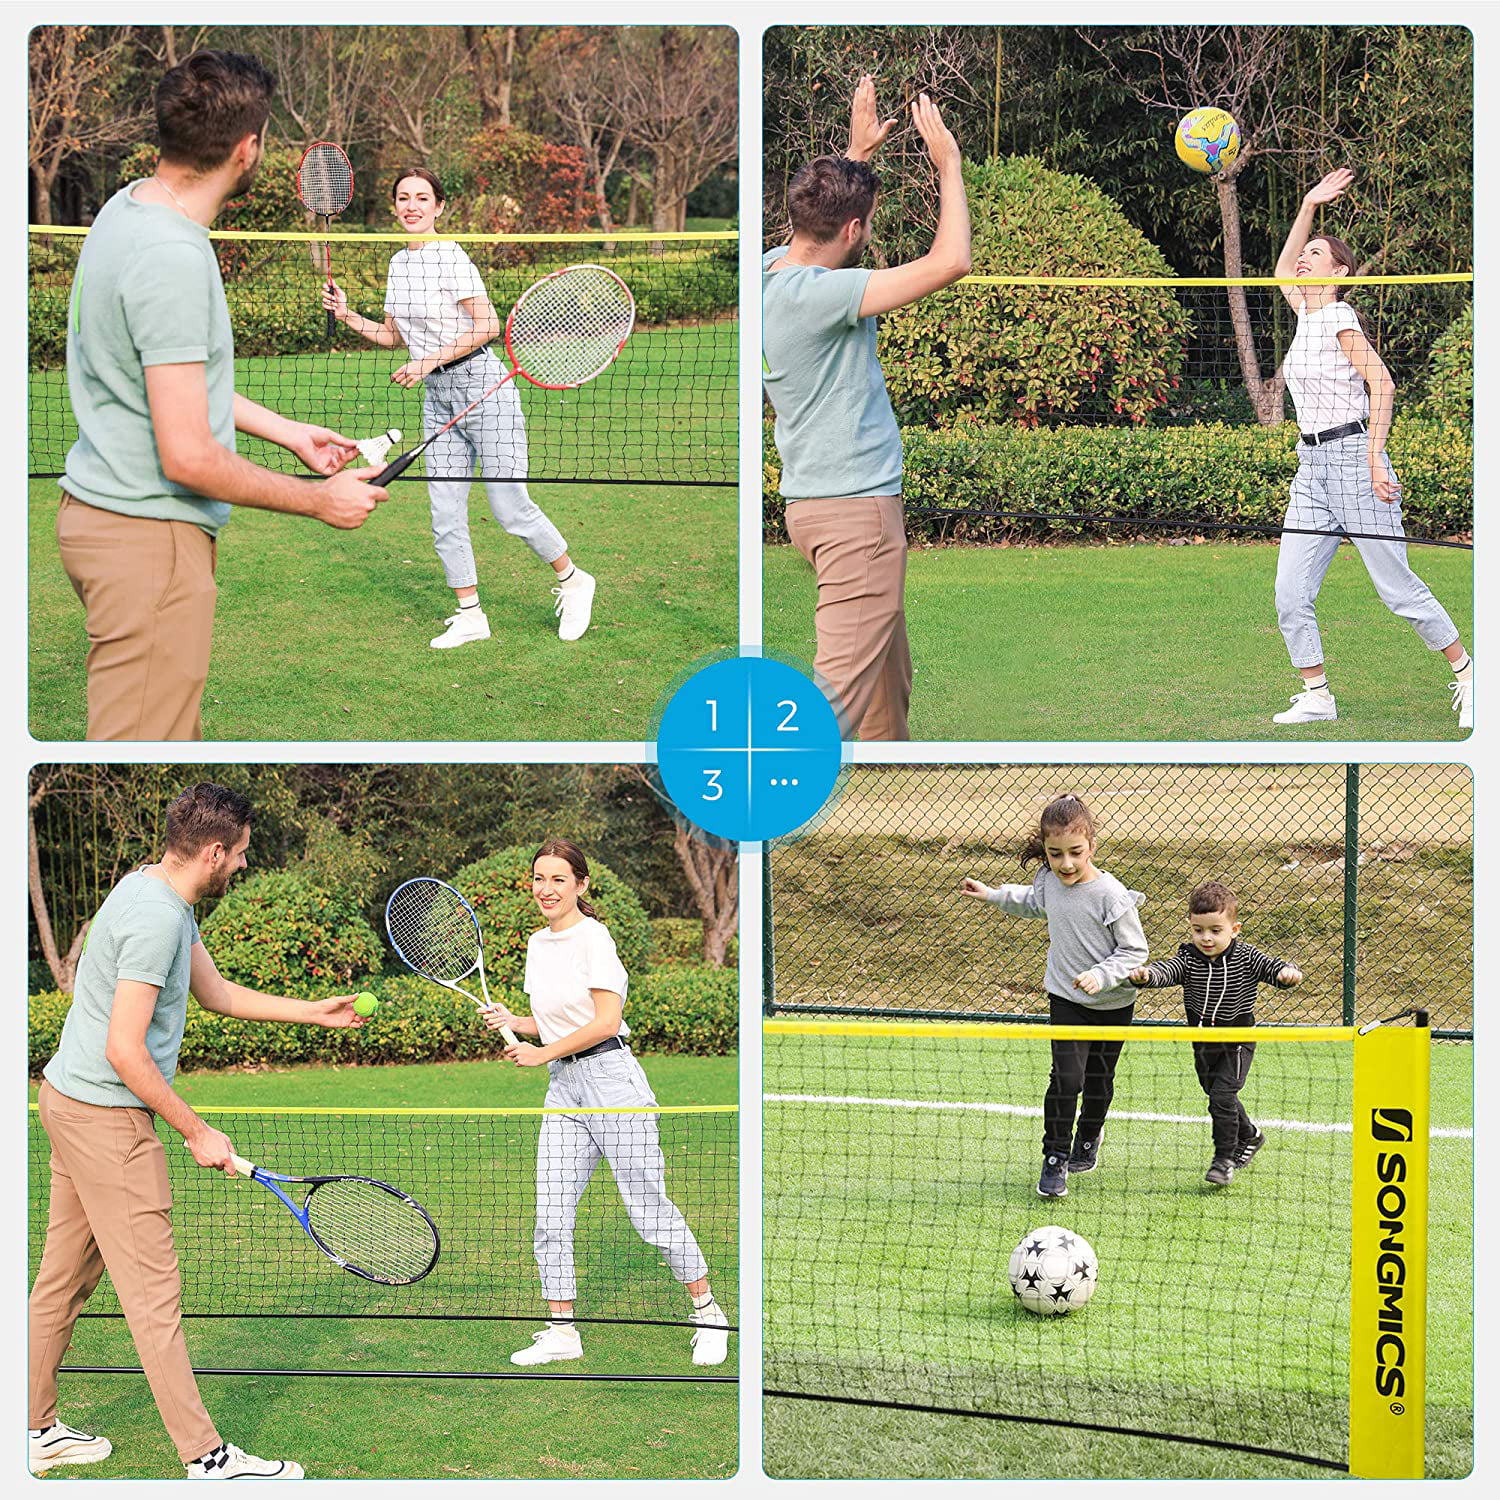 Lkeitwell Portable Badminton Net Set Beach Indoor or Outdoor Courts Easy Setup Nylon Sports Net with Poles Driveway Tennis Football Tennis Net Kids Volleyball 